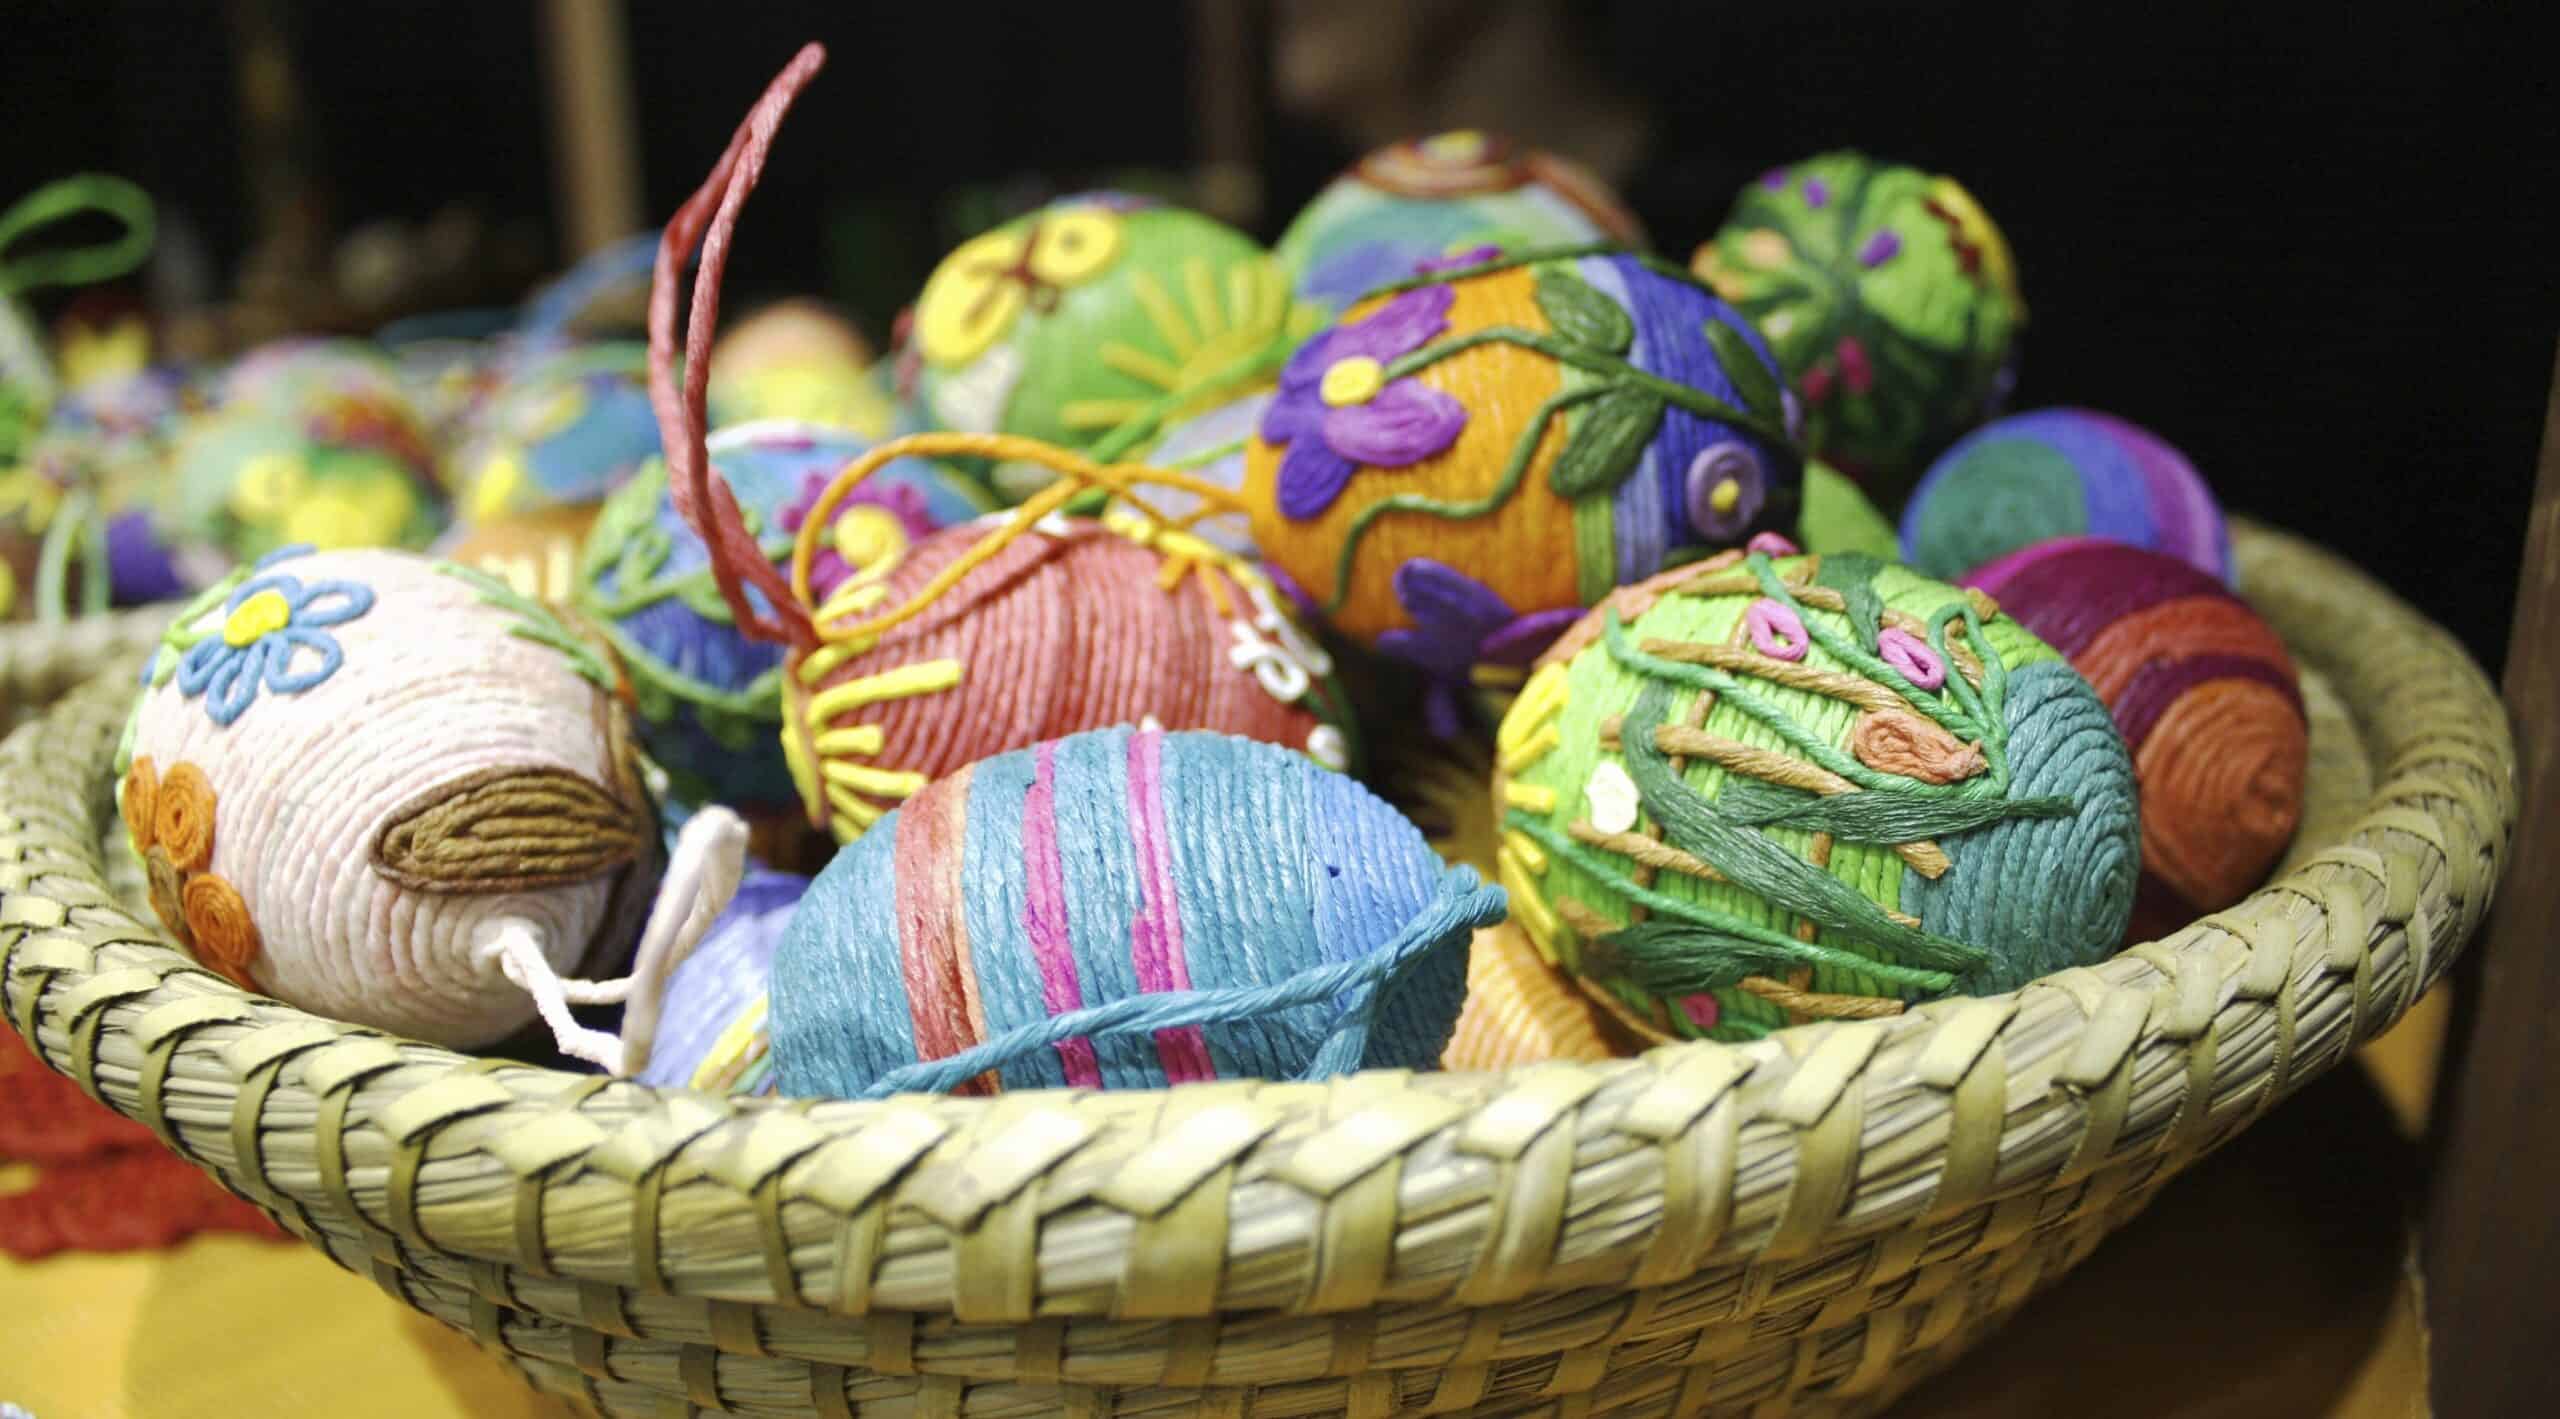 A basket full of colorful Easter eggs